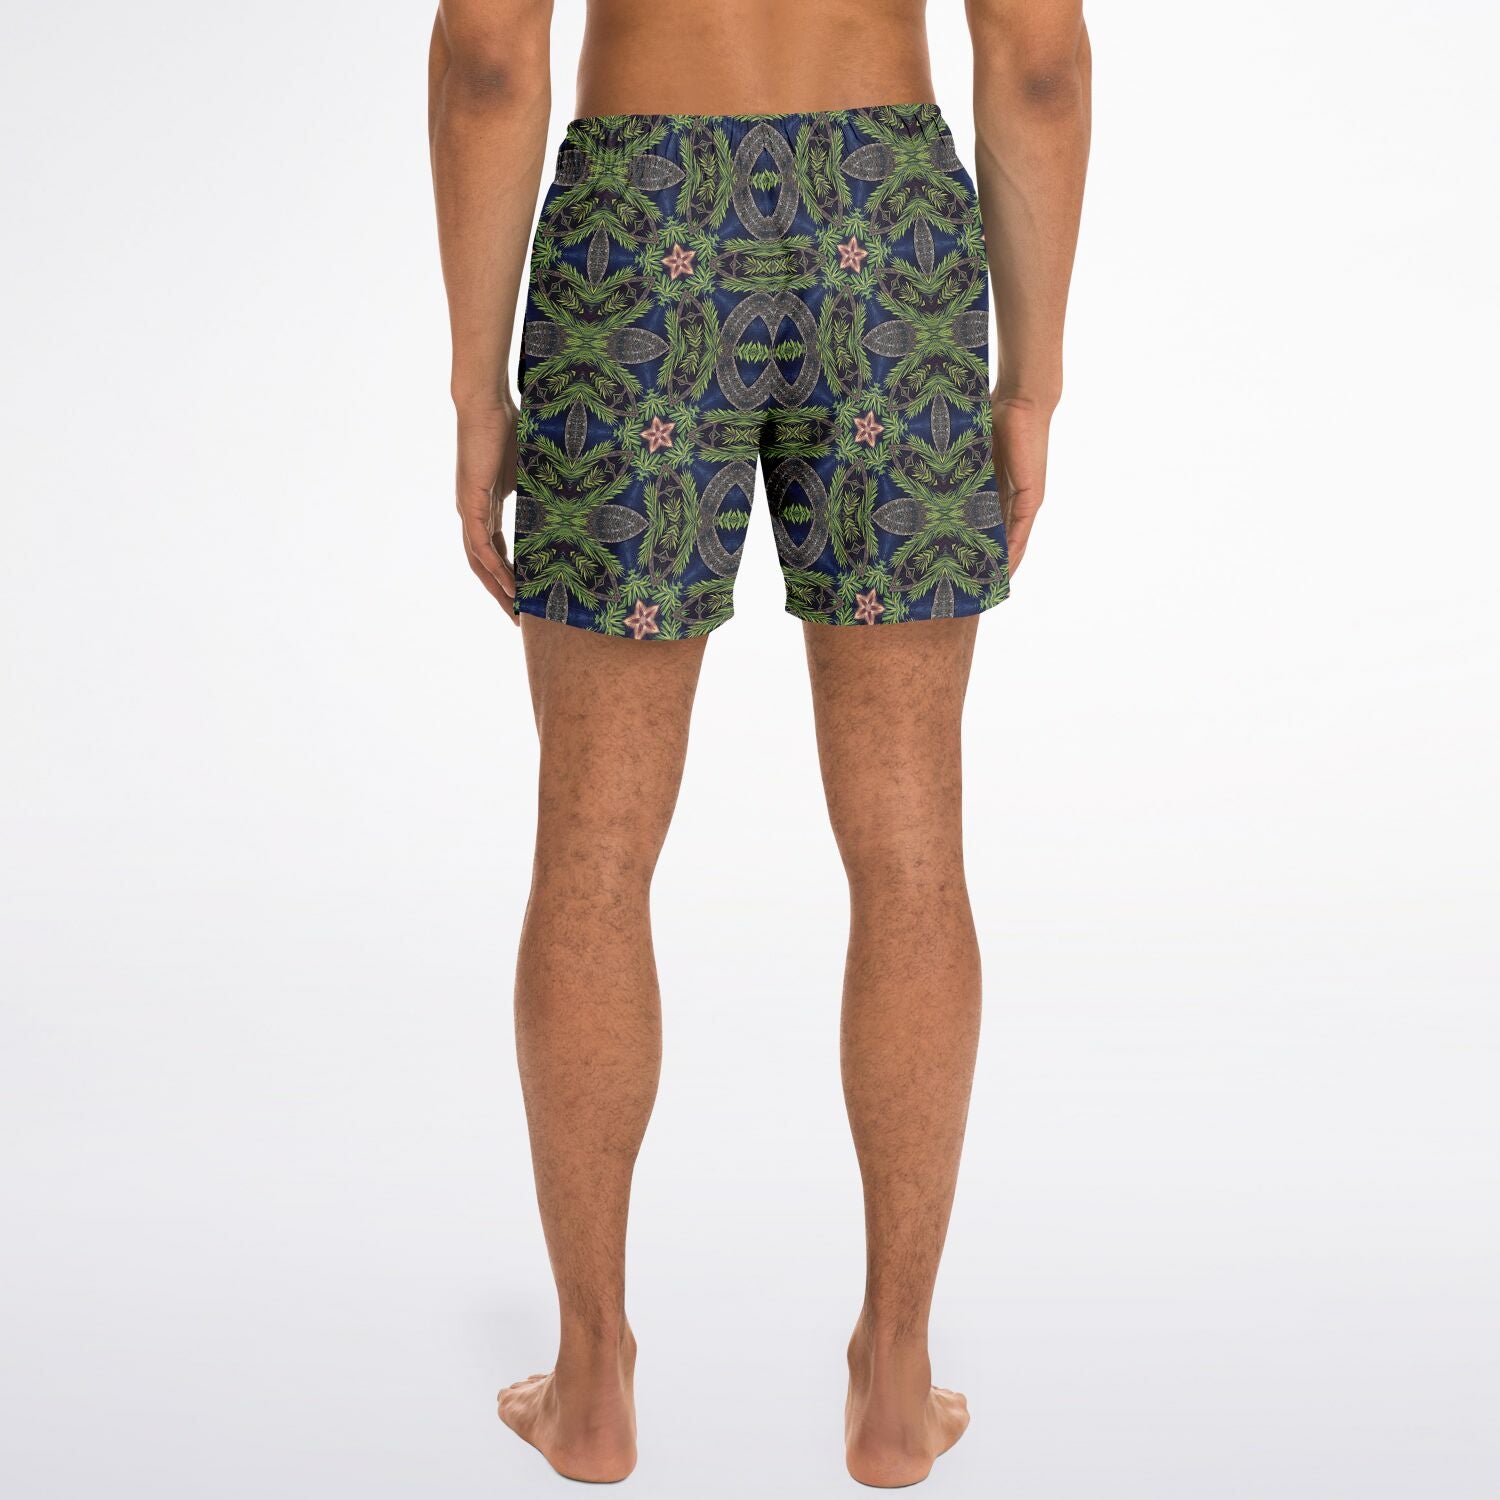 Back view of swimming trunks with black forester design print